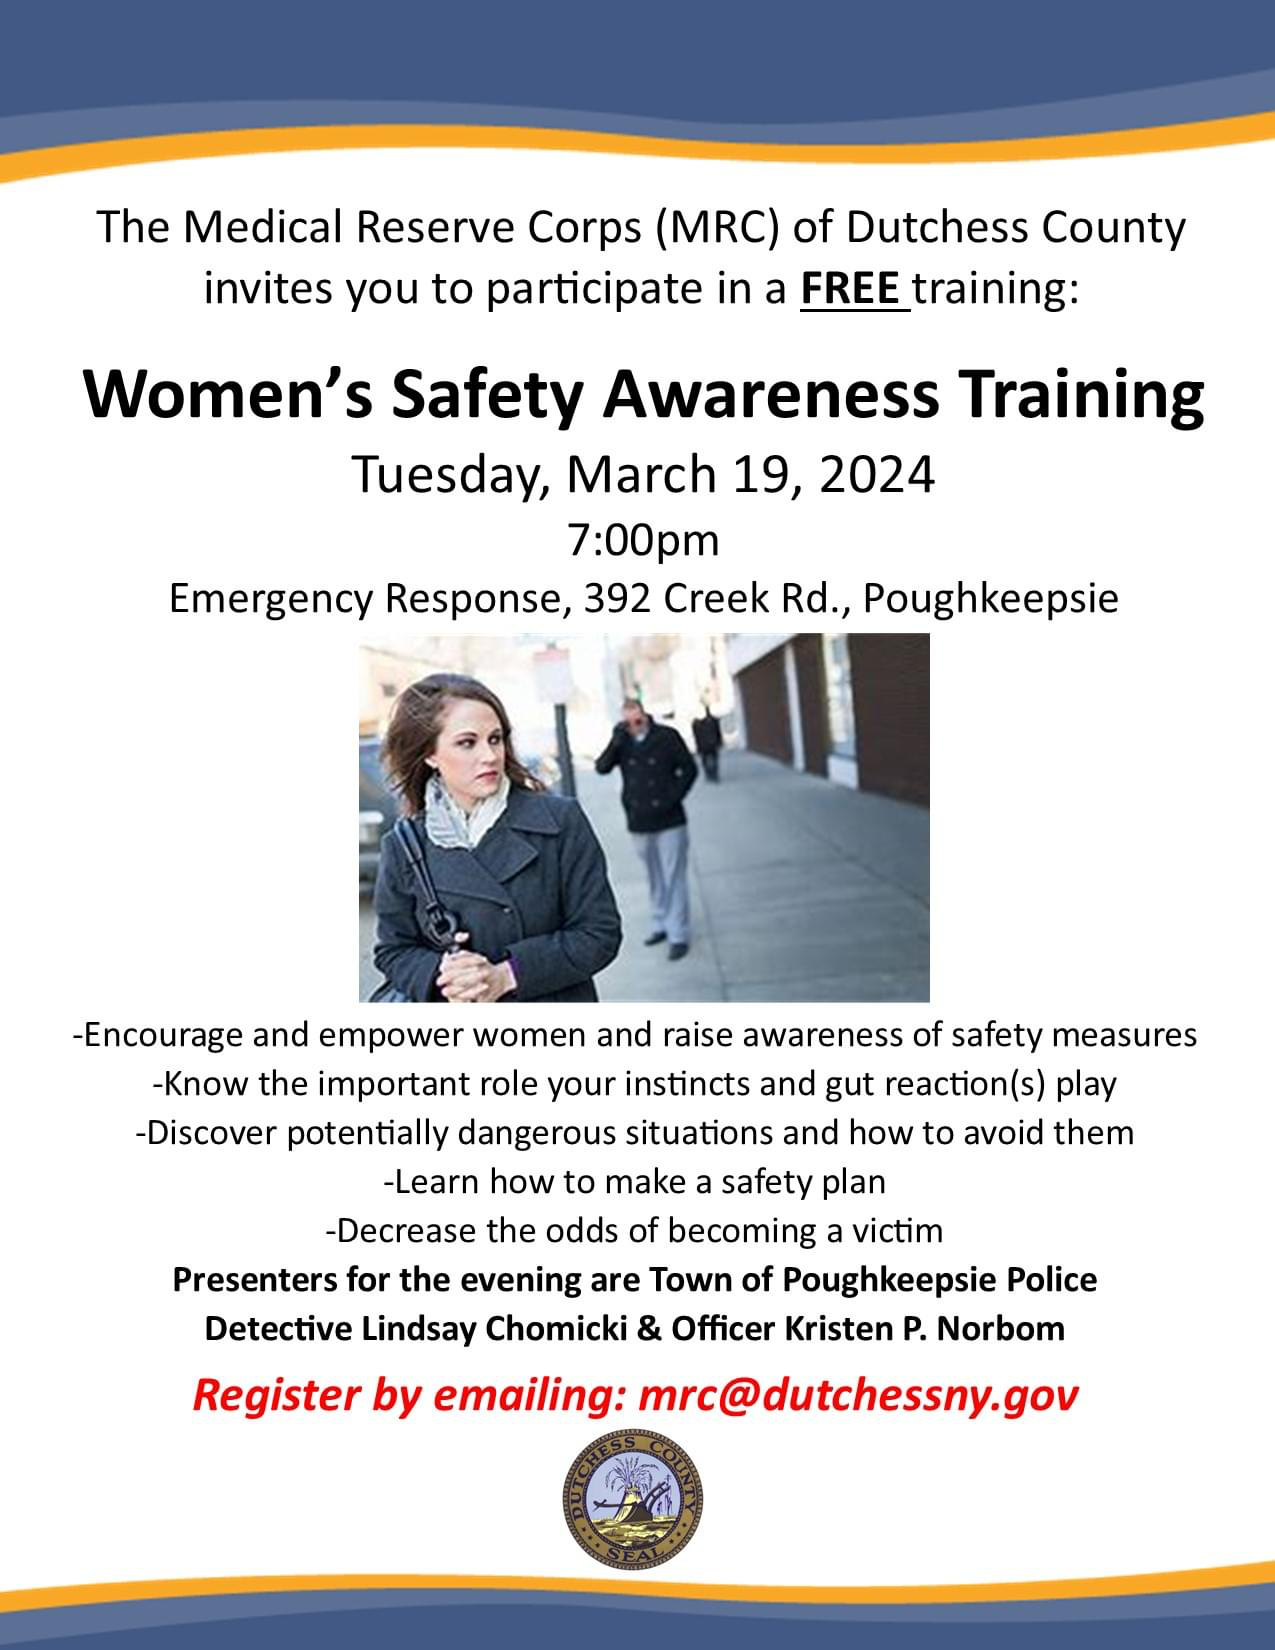 Women's Safety Event Flyer